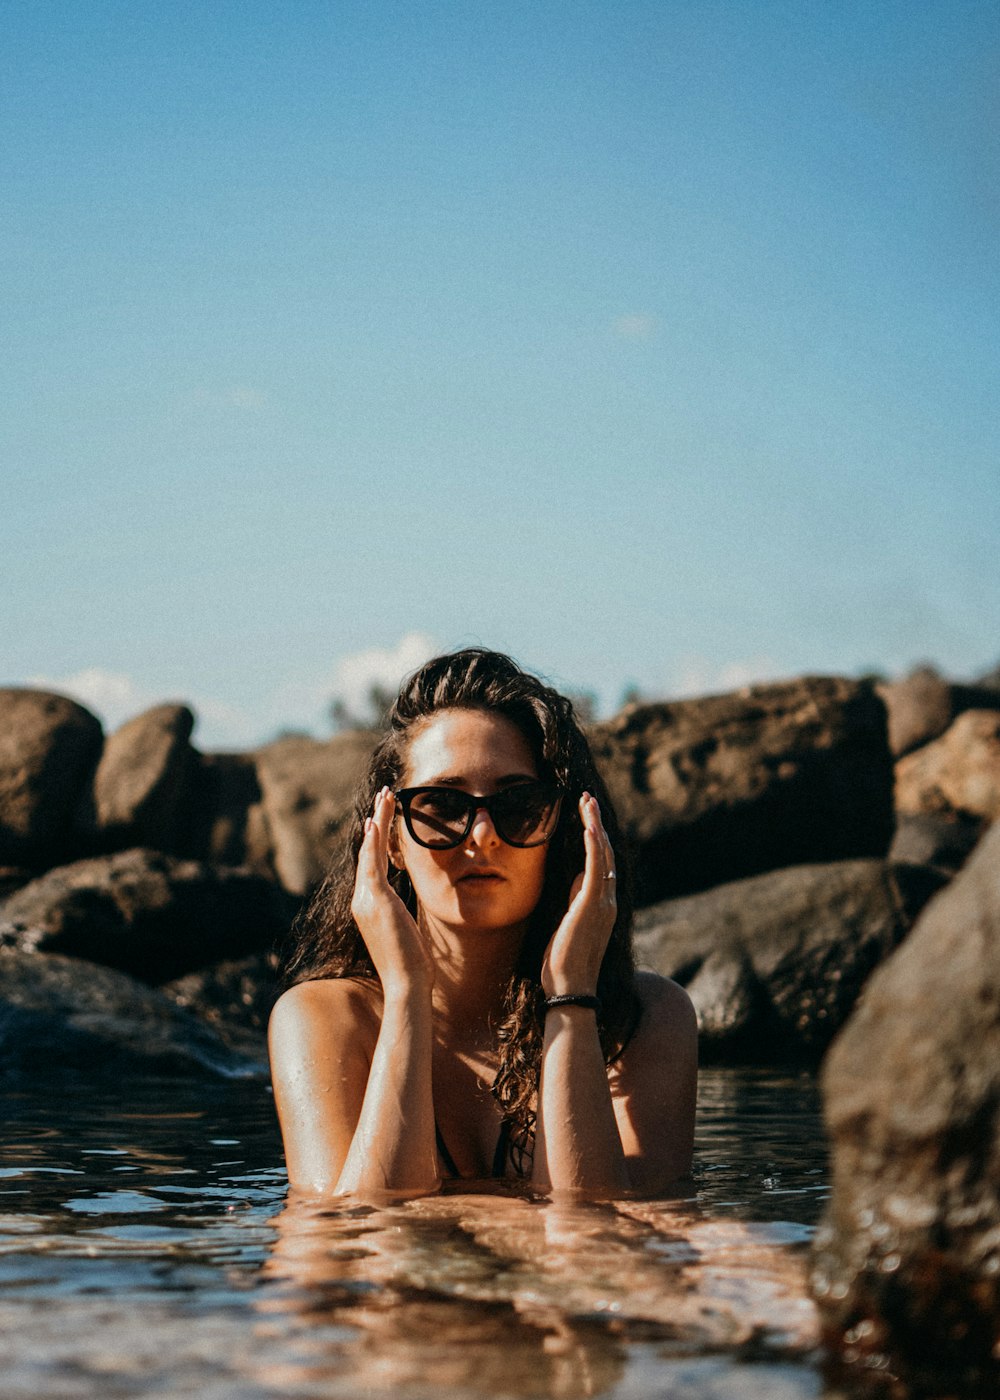 woman in black sunglasses sitting on rock near body of water during daytime